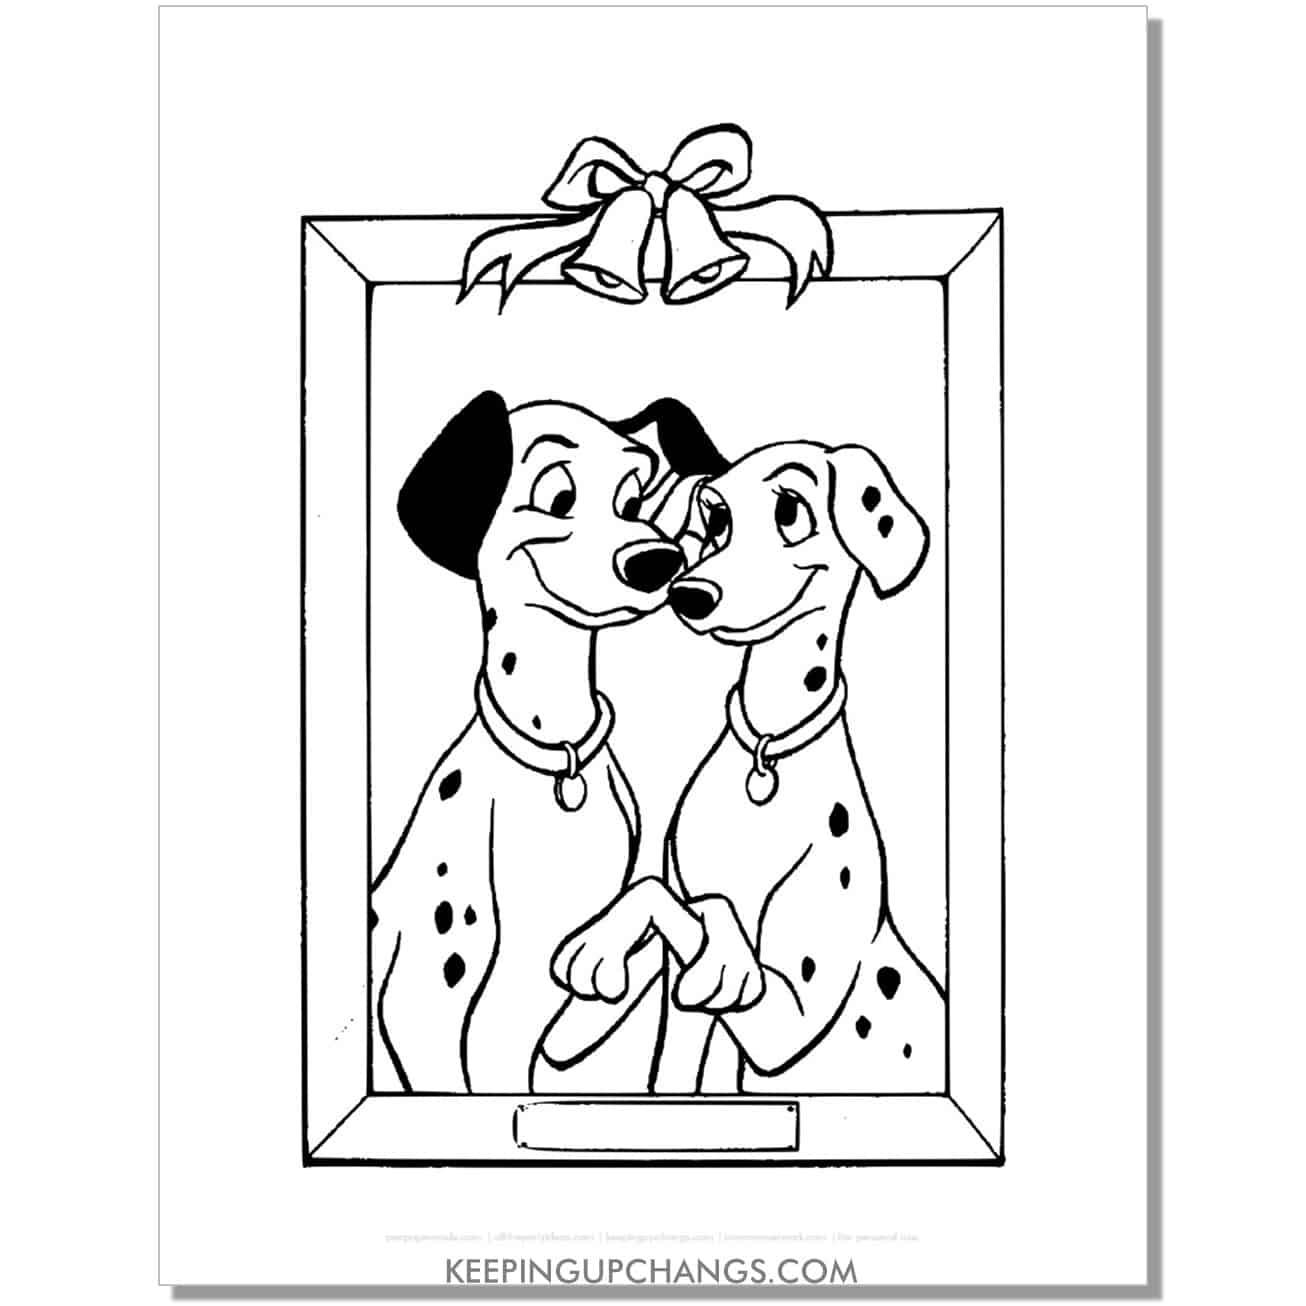 free family portait of pongo and perdita 101 dalmations coloring page, sheet.